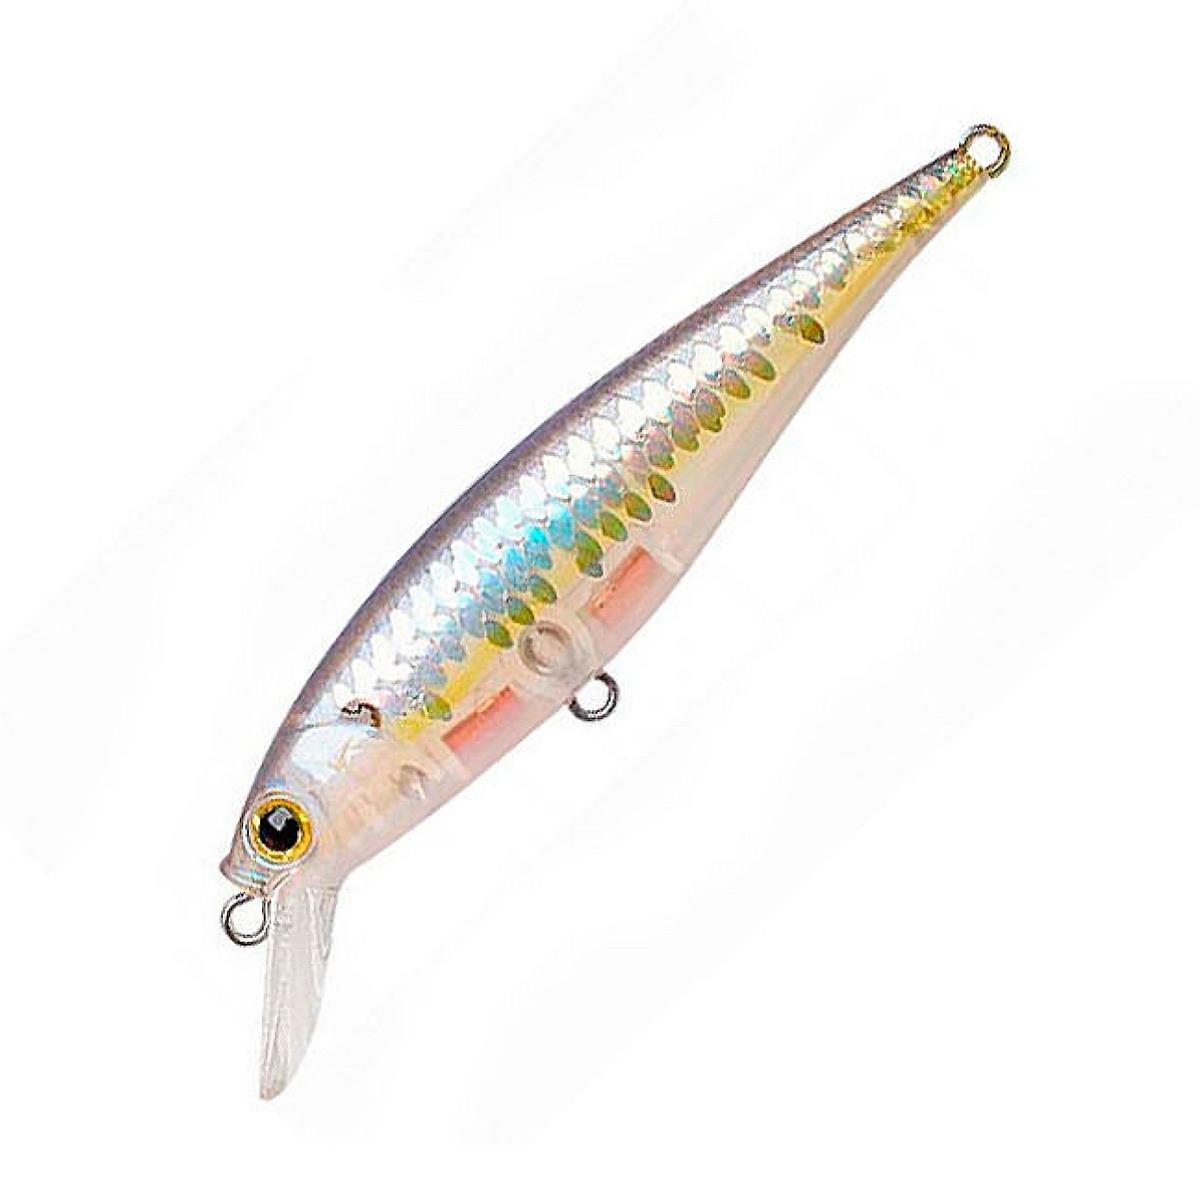 Воблер Pointer 78-225 Ghost Chartreuse Shad Lucky Craft воблер clutch sr 0002 misty shad lucky craft